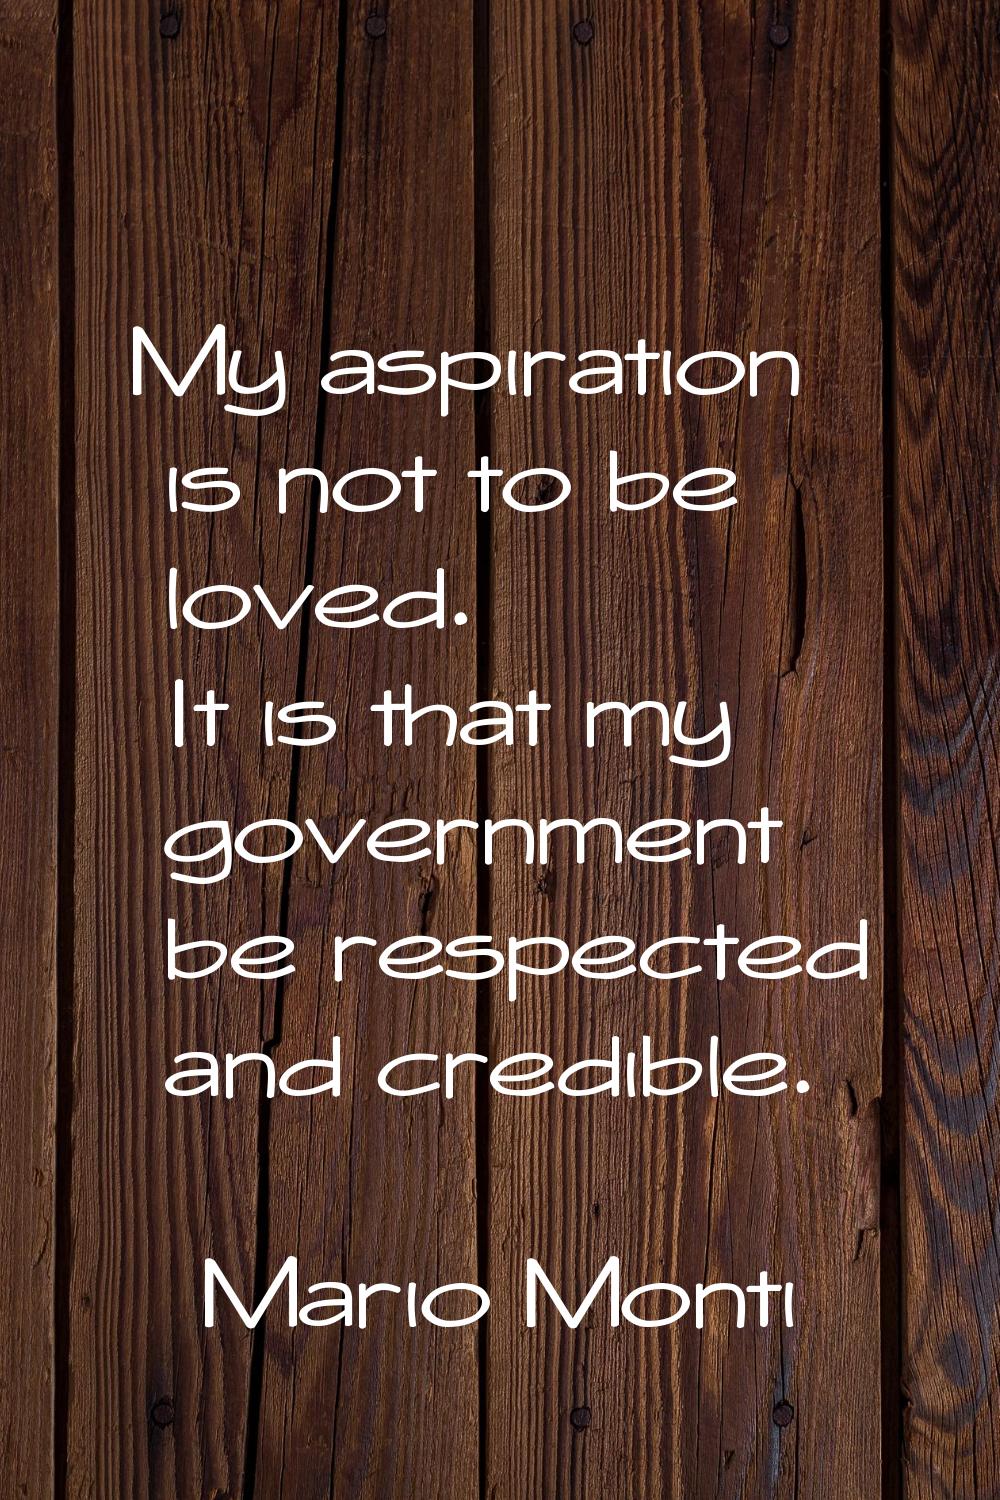 My aspiration is not to be loved. It is that my government be respected and credible.